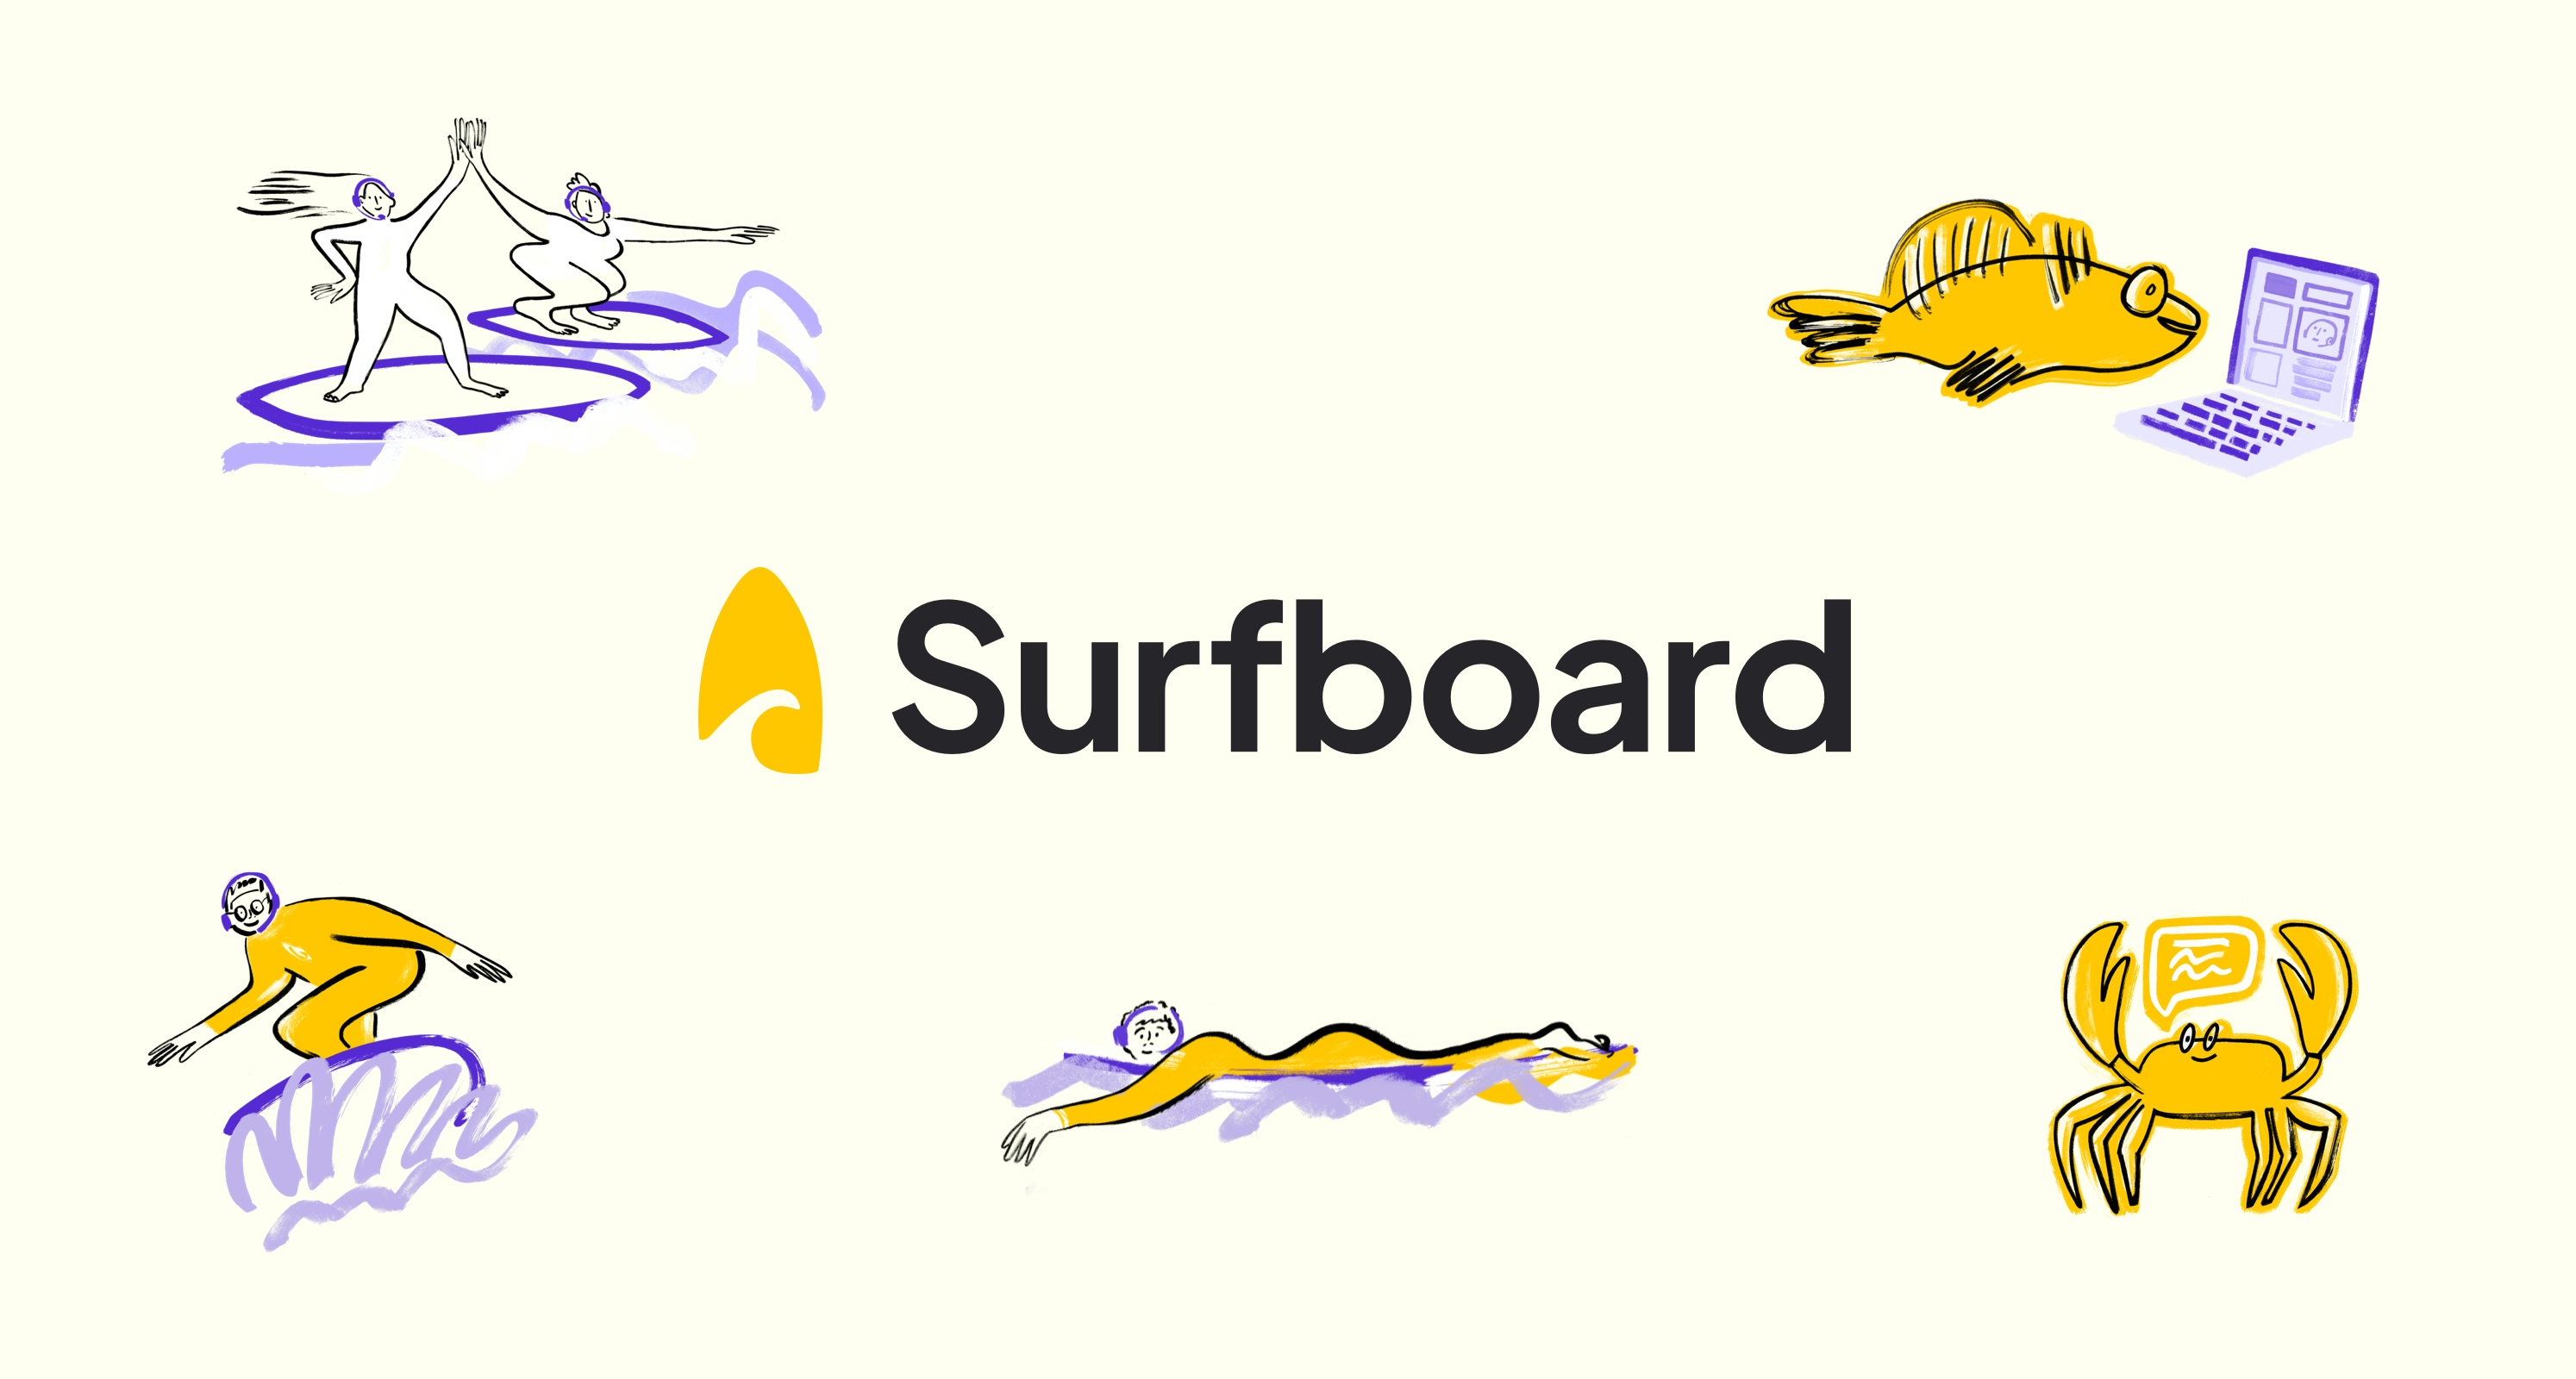 Sufboard’s logo - A yellow surfboard with a wave on it and “Surfboard” surrounded by icons for two surfers high-fiving, a fish looking at a laptop, a crab with a speech bubble, a surfer lying on a board and a lone surfer sit on a lemon background